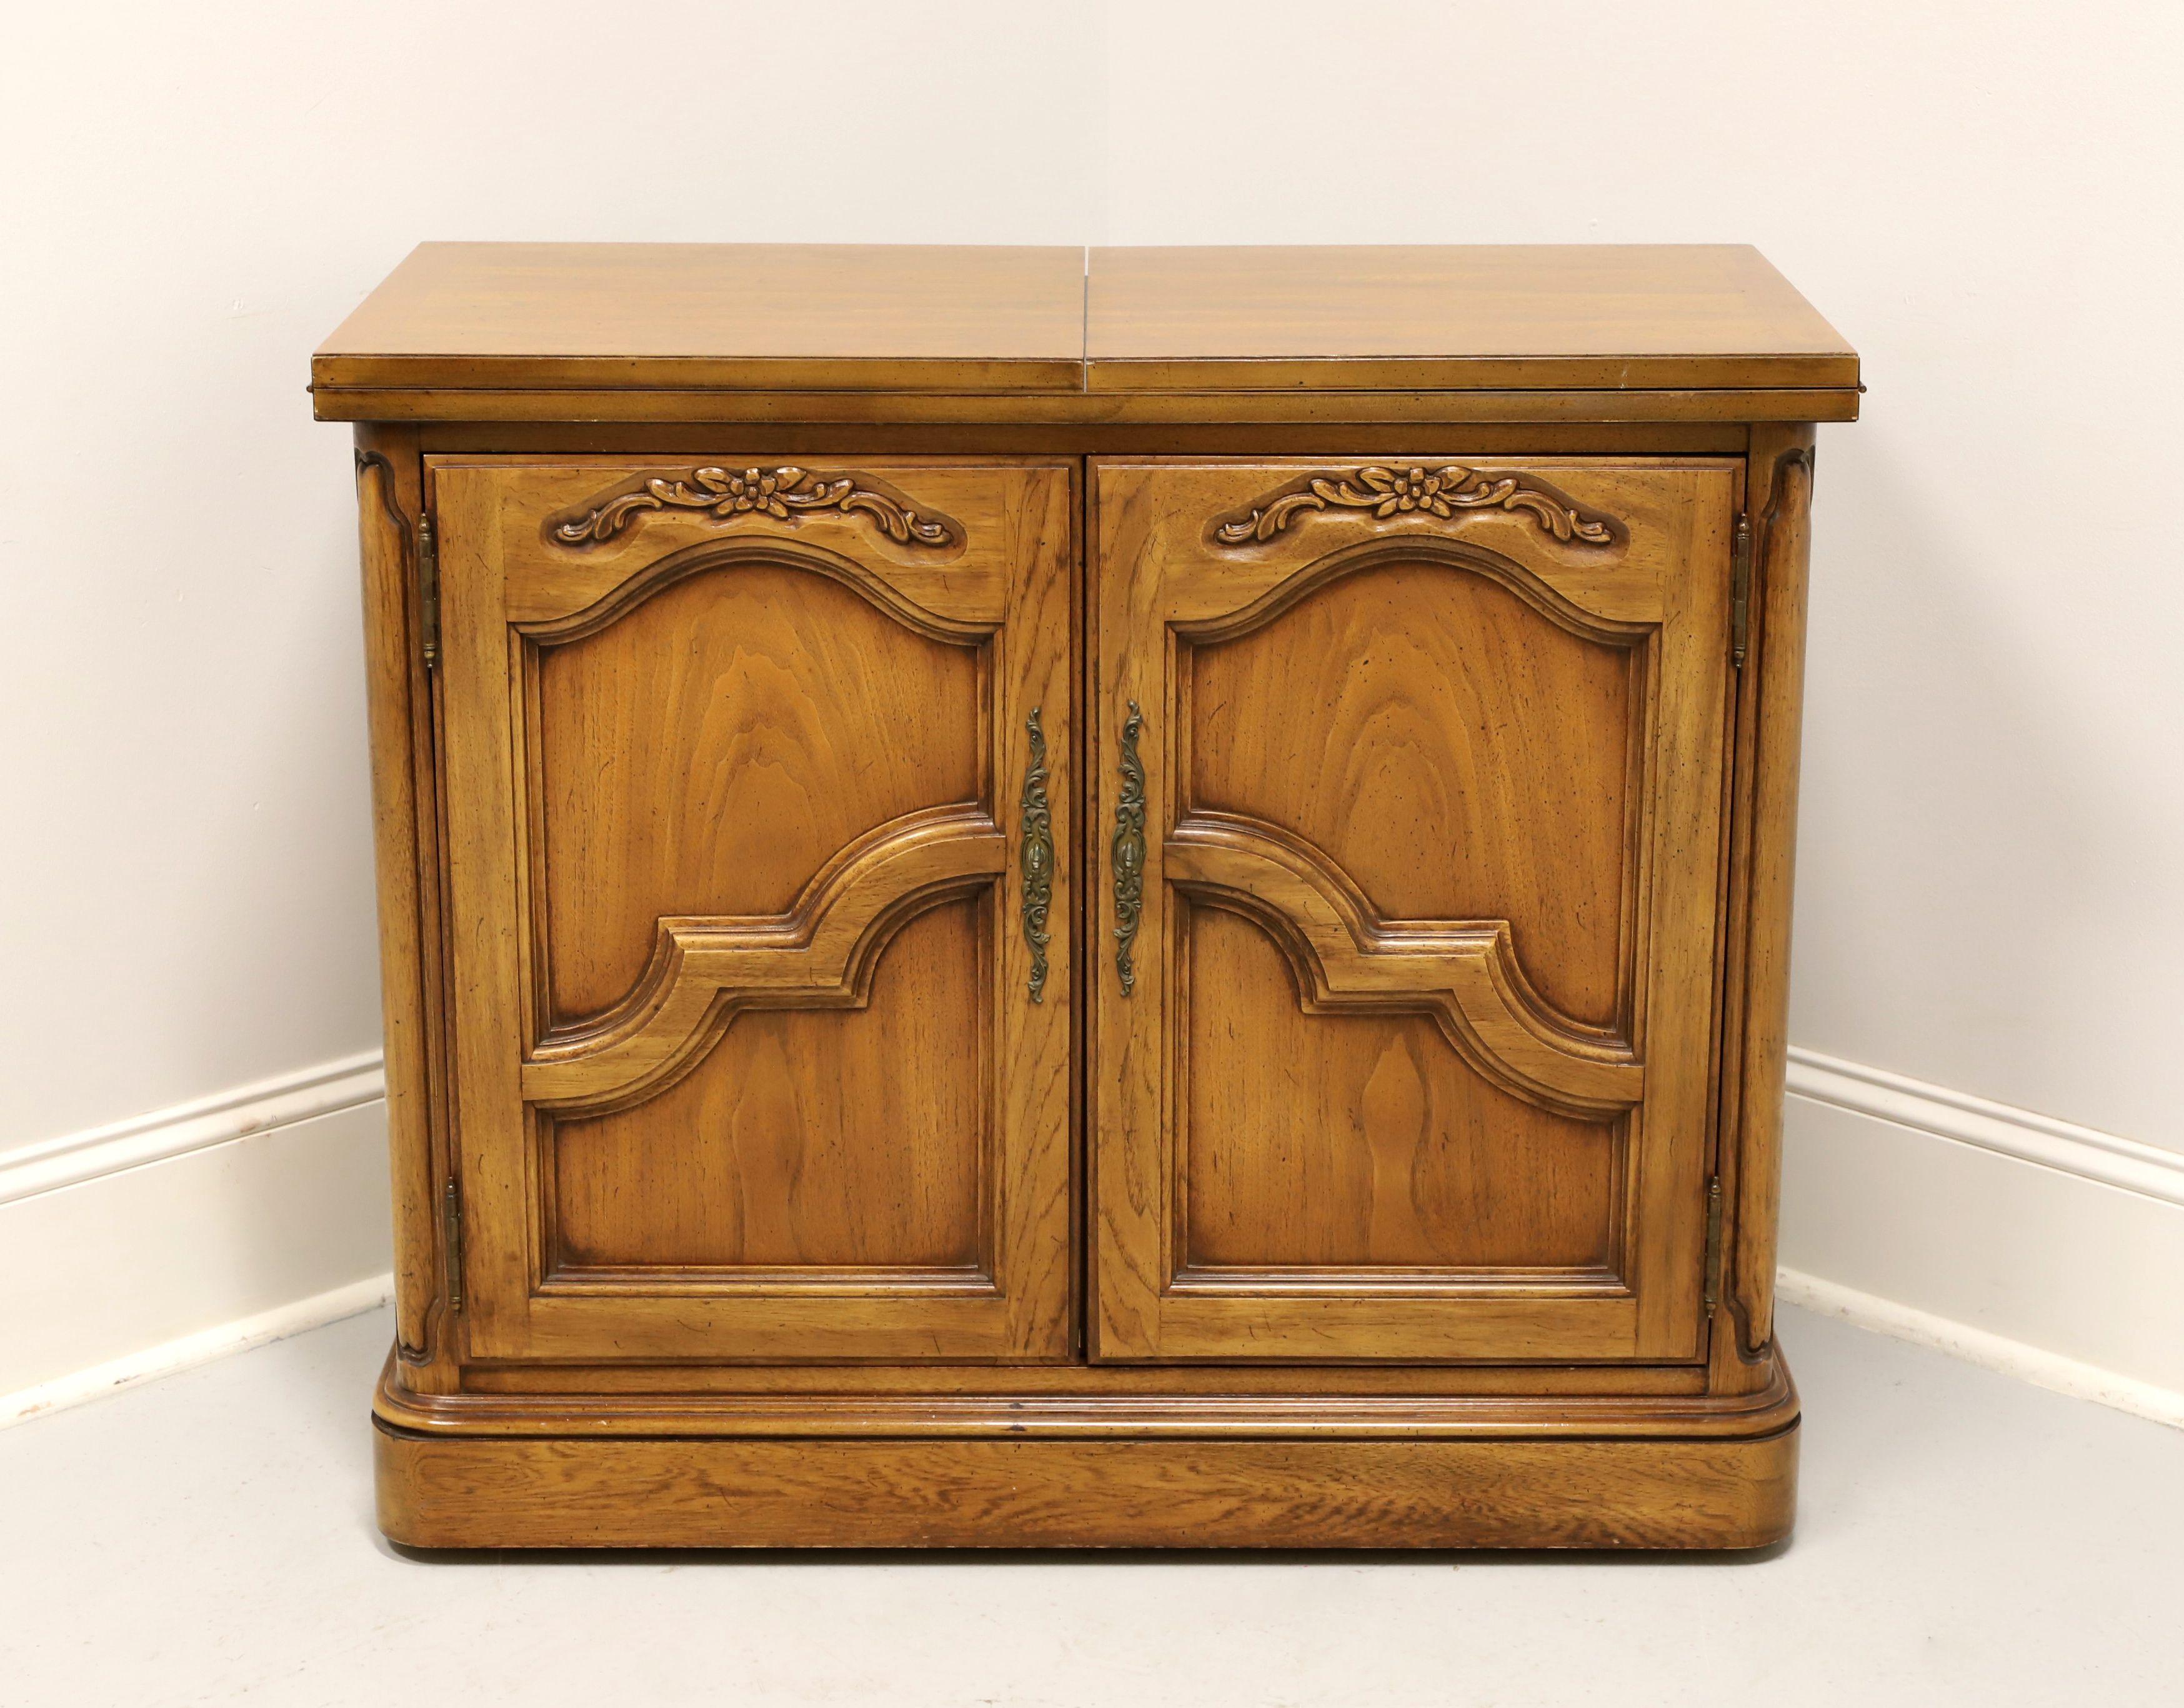 A French Country server by Thomasville. Solid oak with banded top, decorative carvings to door fronts, brass hardware, flip out hard composite surface expanded top and on wheels for easy movement. Features the flip out top exposing the composite